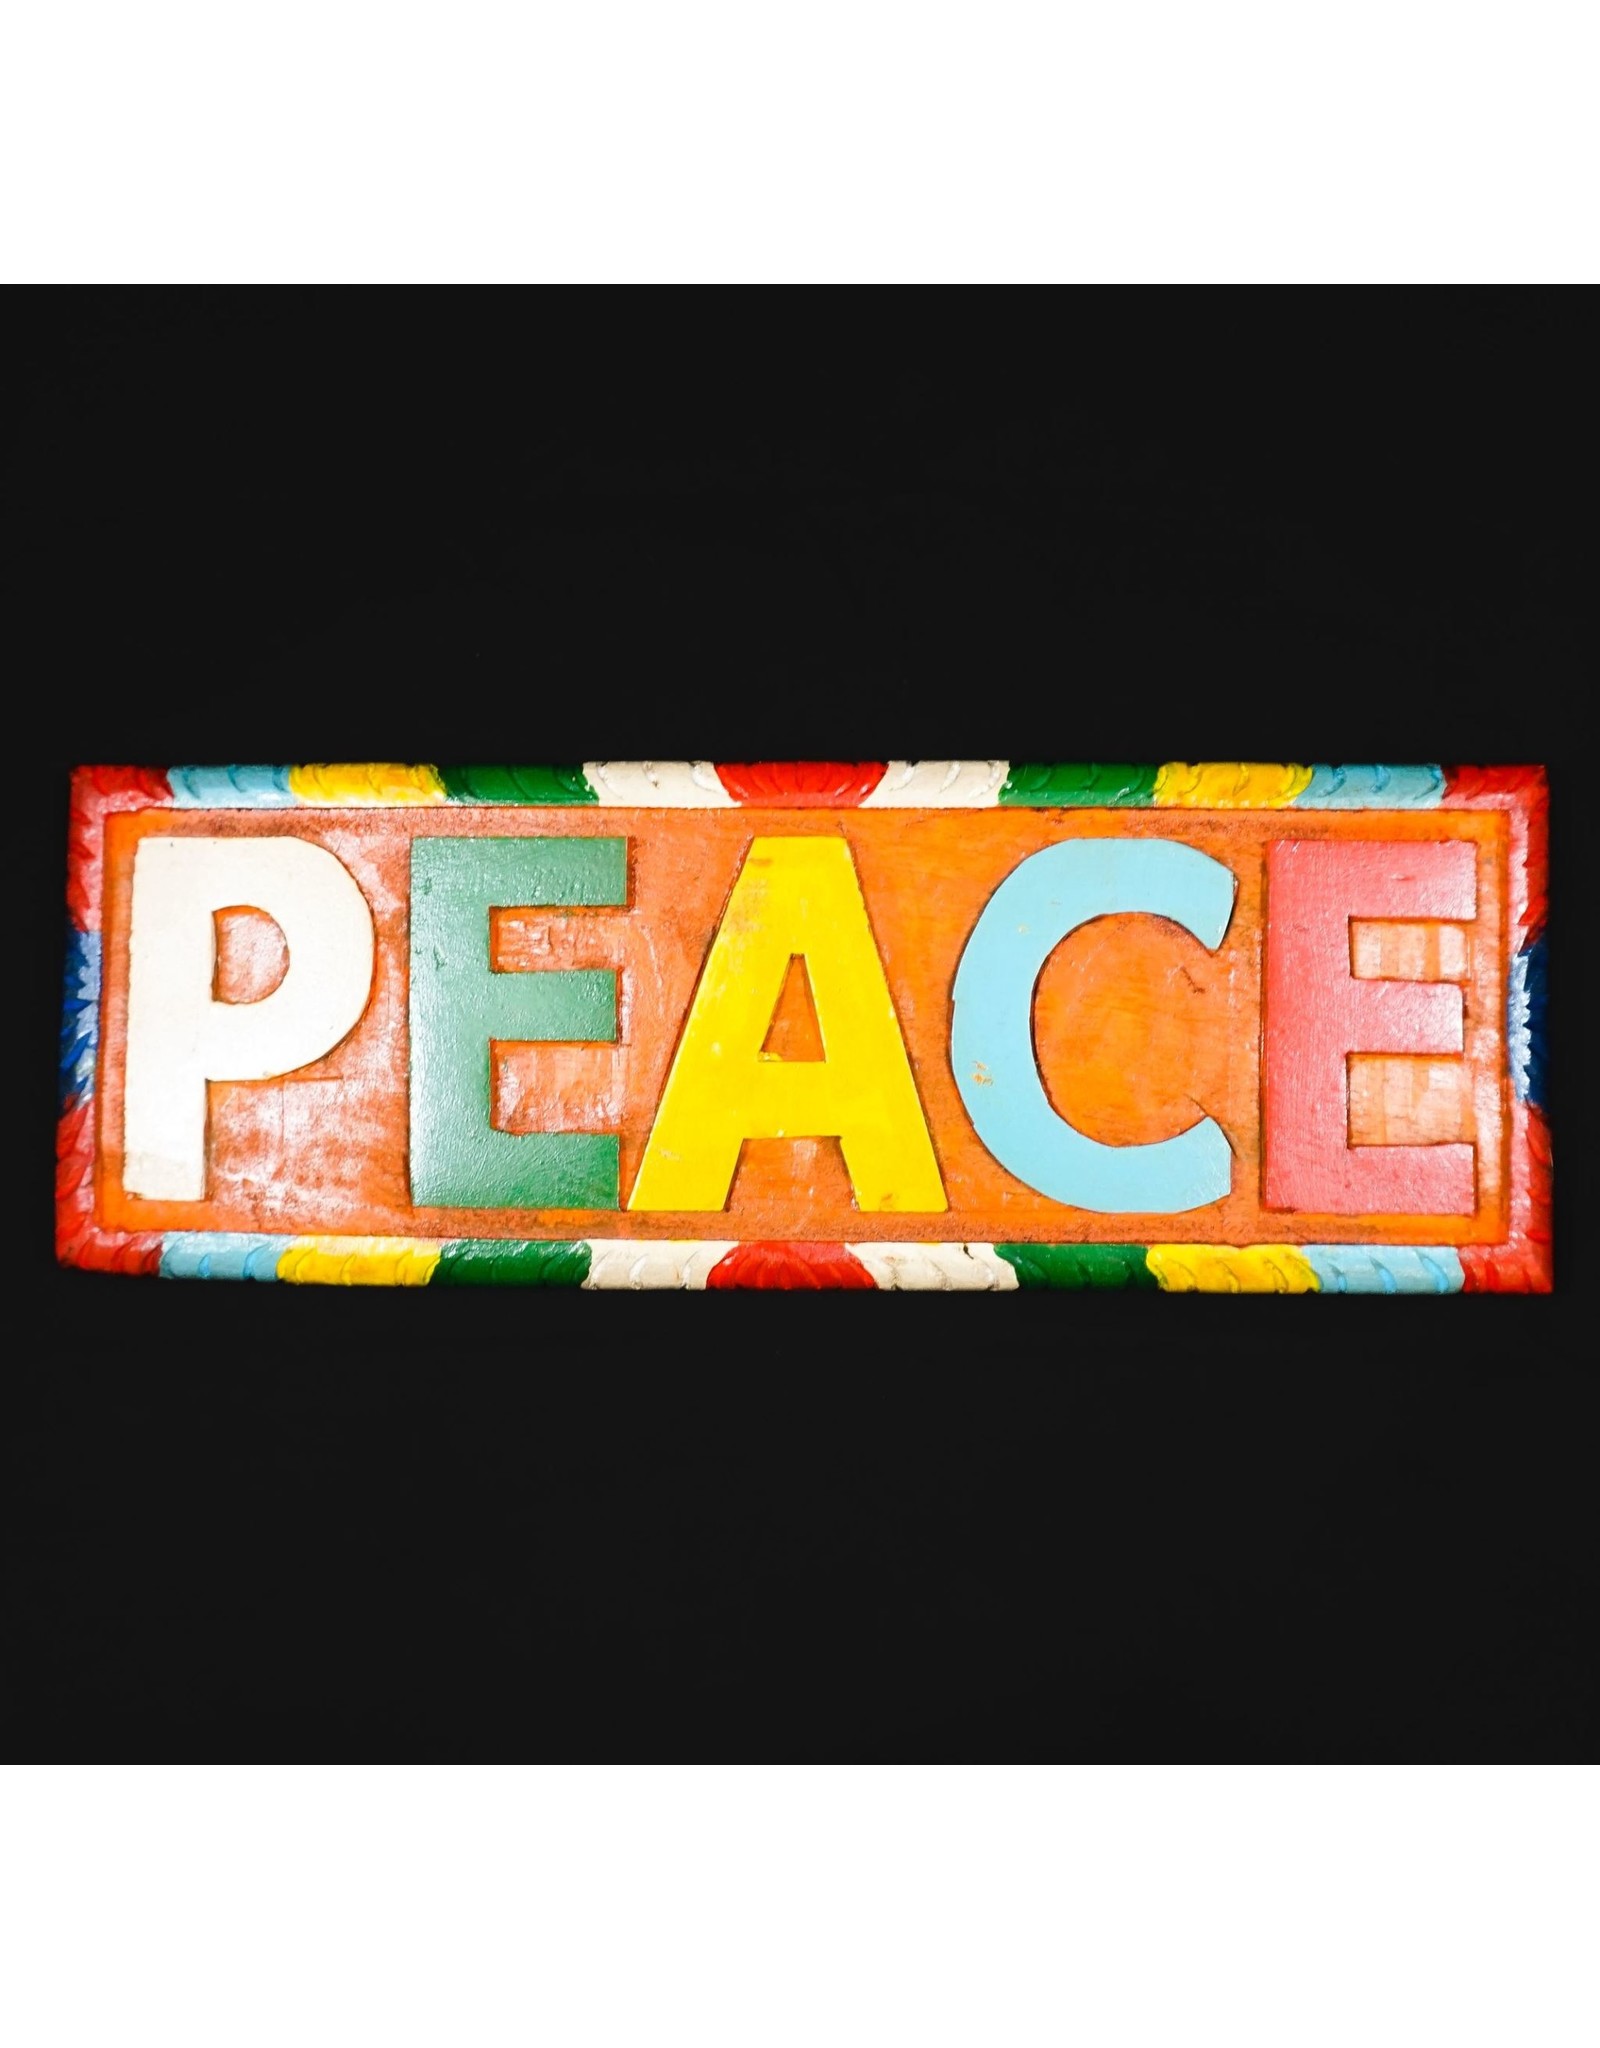 Wall Plaque - Peace